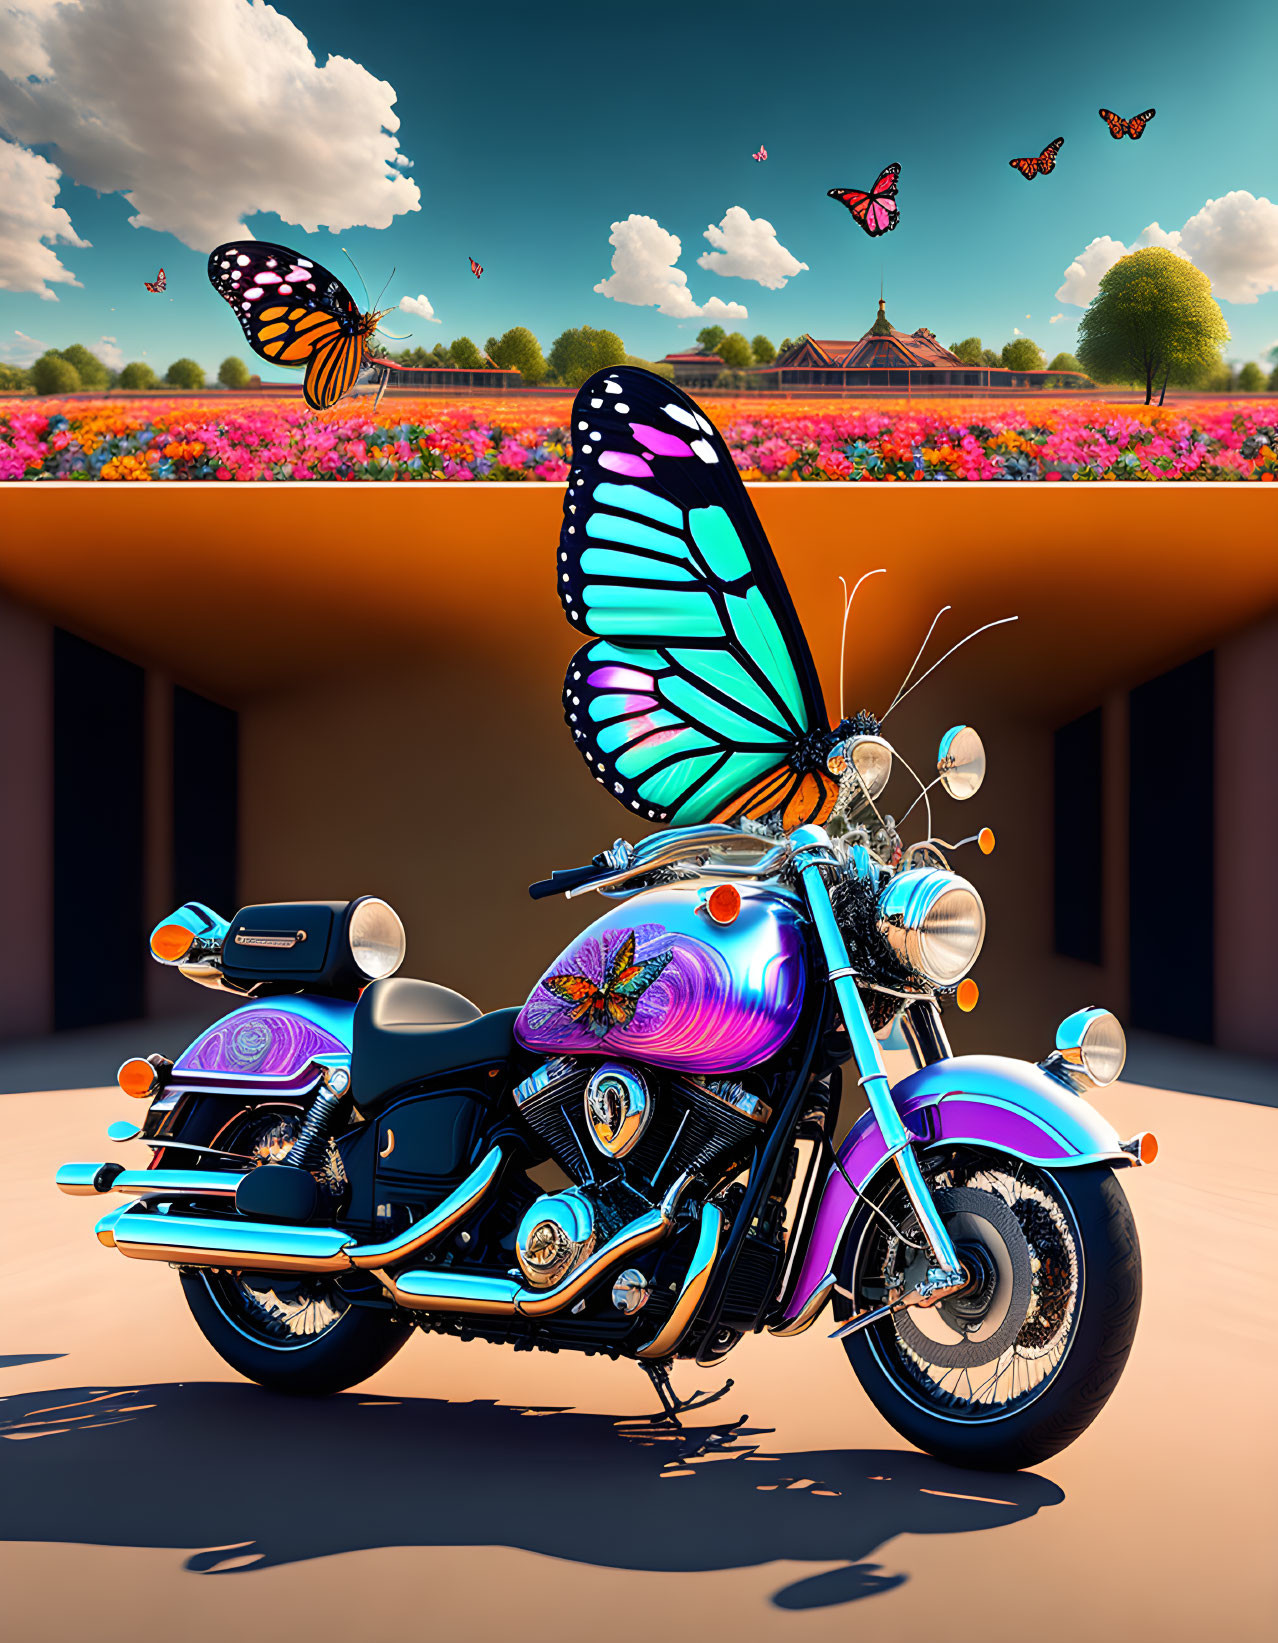 Butterfly riding a motorcycle